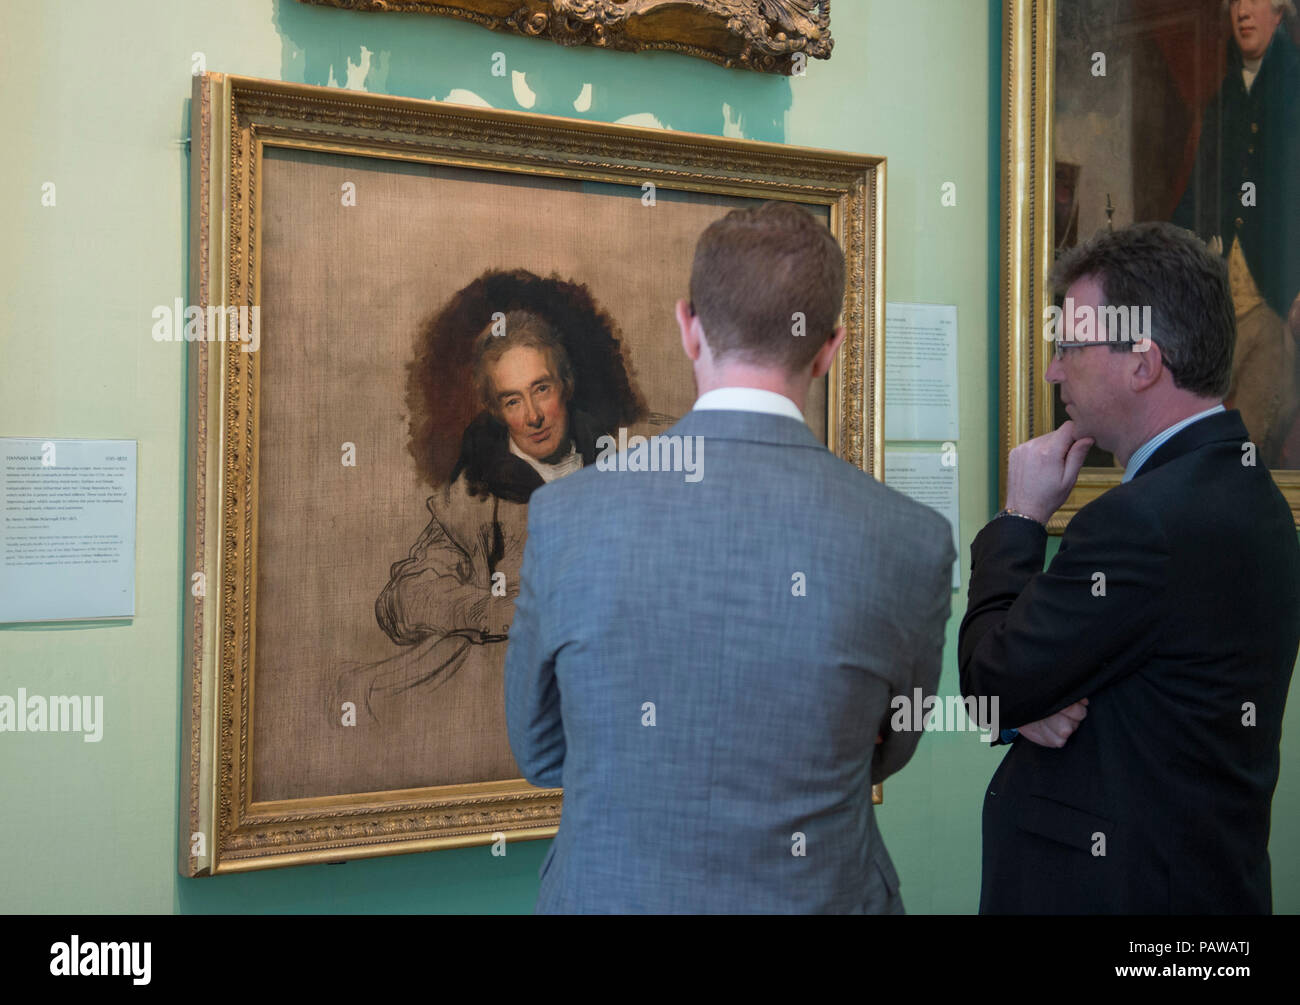 National Portrait Gallery, London, UK. 25 July, 2018. Jeremy Wright, Culture Secretary (right) and Dr Nicholas Cullinan, Director, National Portrait Gallery (left) view Sir Thomas Lawrence’s famous portrait of William Wilberforce, which will travel to Hull, the place of his birth, for the first time as part of ‘Coming Home’. Lawrence’s unfinished portrait of Wilberforce, was one of the first works acquired by the National Portrait Gallery when it was established in 1856. The work will go on display in the Ferens Art Gallery in Hull in 2019. Credit: Malcolm Park/Alamy Live News. Stock Photo